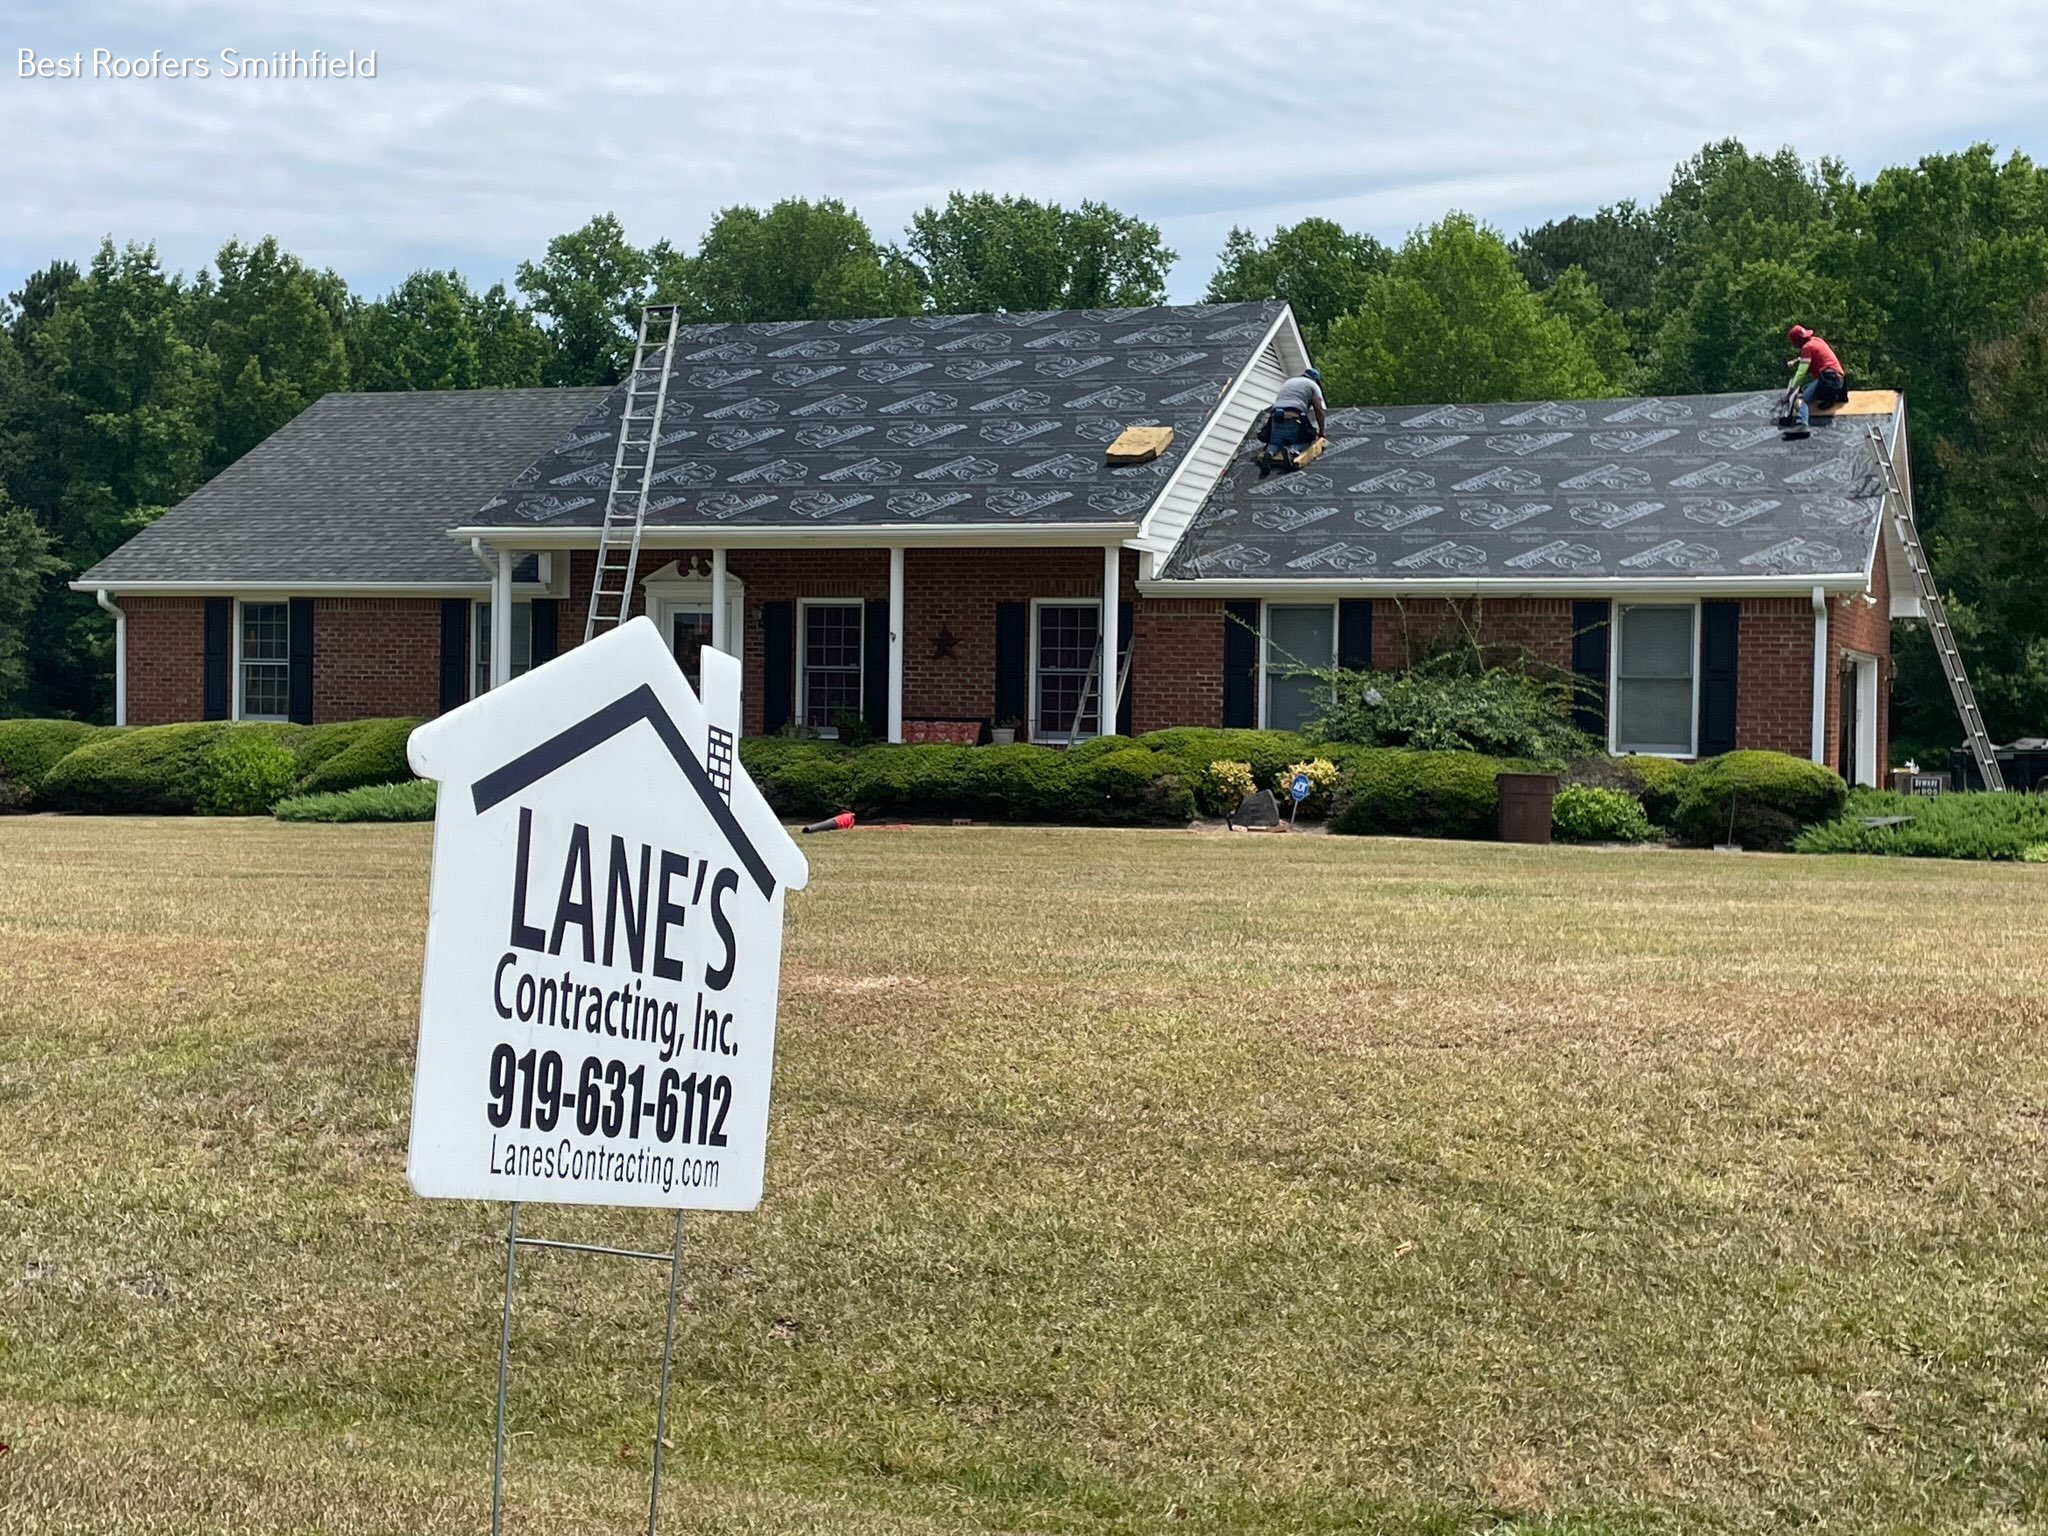 Lane's Contracting, Inc. Mention Services that People can Get From Them